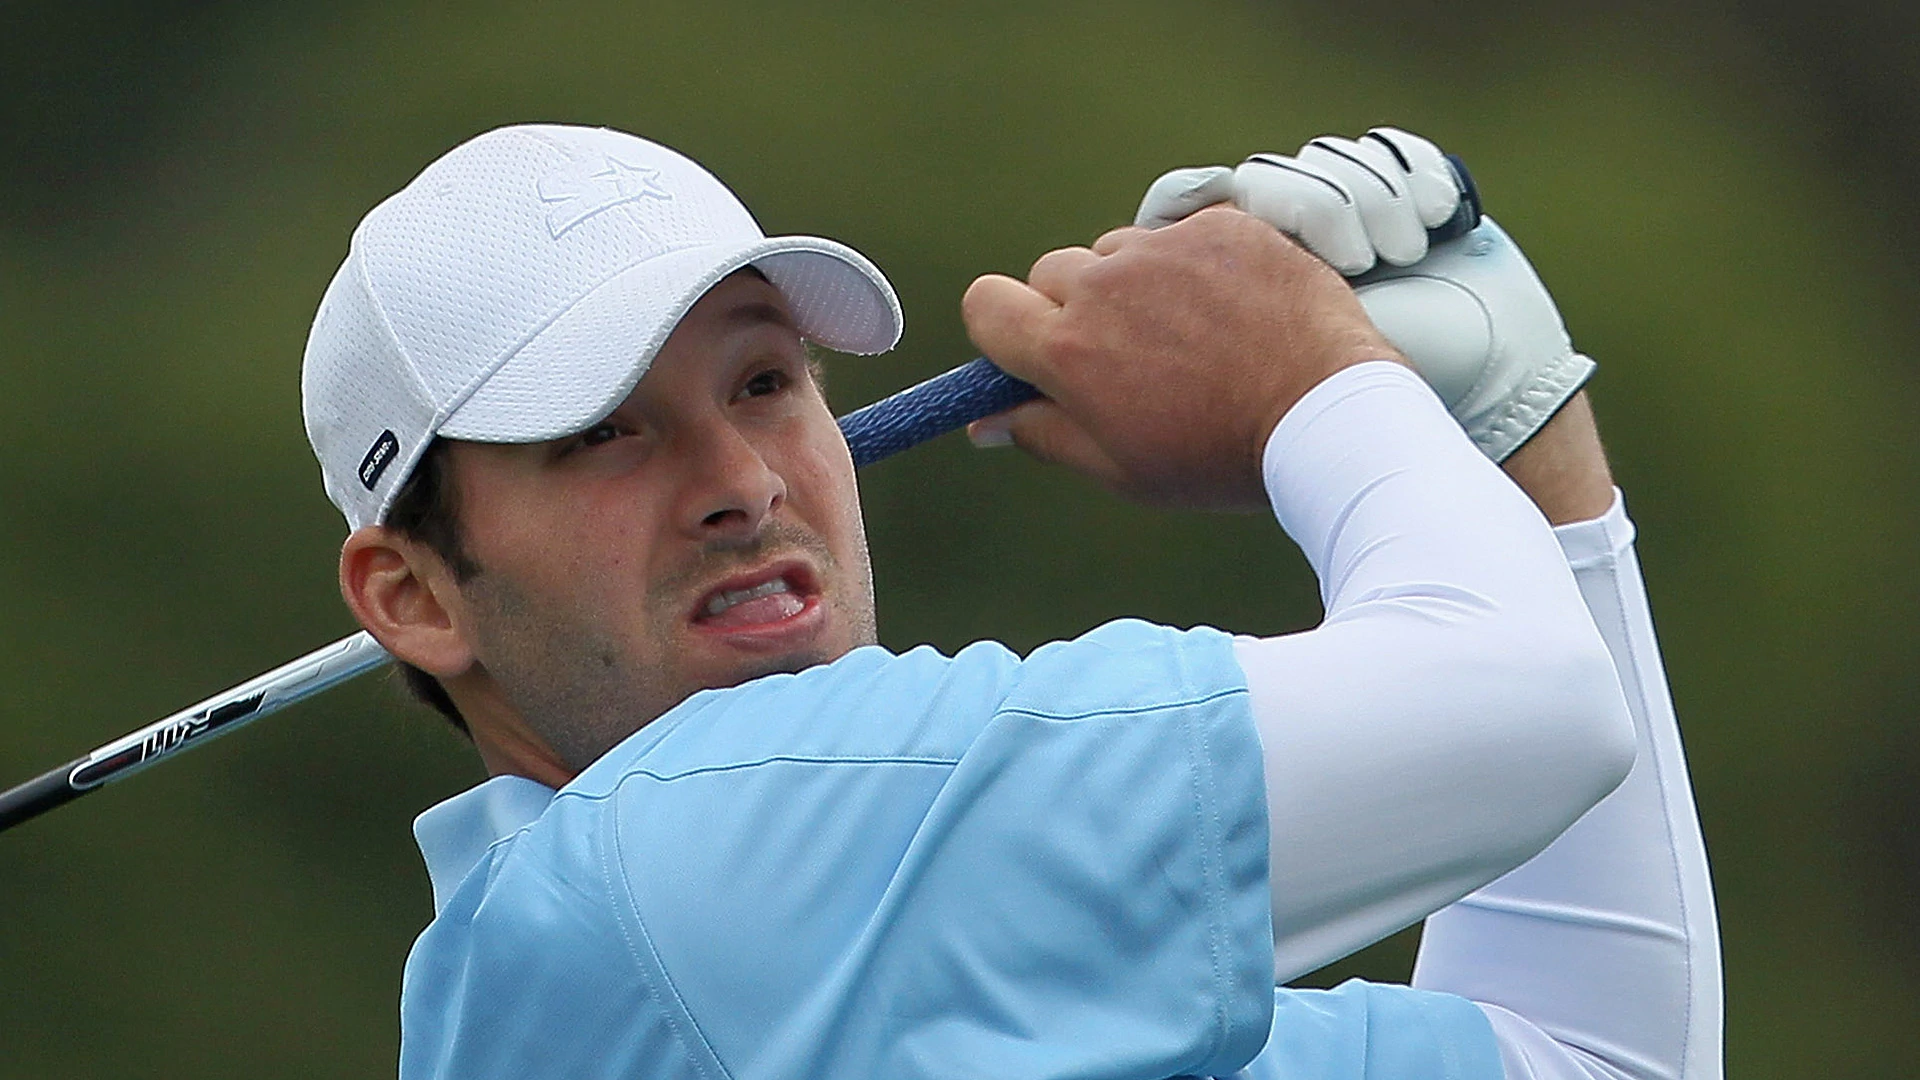 Romo MCs at Western Amateur, cited for slow play